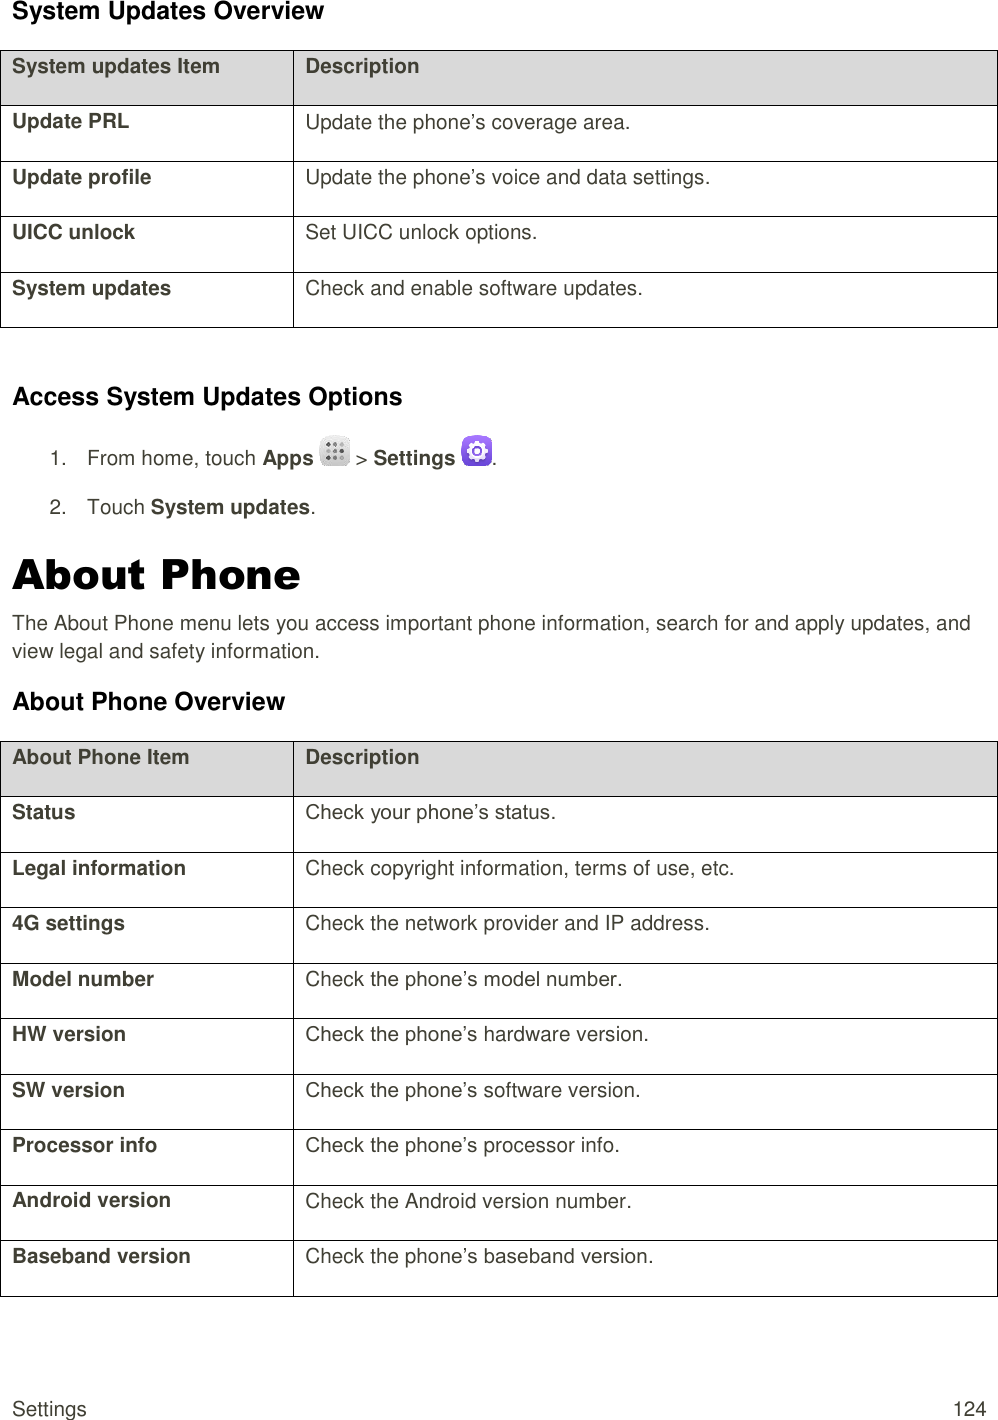 Settings  124 System Updates Overview System updates Item Description Update PRL Update the phone’s coverage area. Update profile Update the phone’s voice and data settings. UICC unlock Set UICC unlock options. System updates Check and enable software updates.  Access System Updates Options 1.  From home, touch Apps   &gt; Settings  . 2.  Touch System updates. About Phone The About Phone menu lets you access important phone information, search for and apply updates, and view legal and safety information. About Phone Overview About Phone Item Description Status Check your phone’s status. Legal information Check copyright information, terms of use, etc. 4G settings Check the network provider and IP address. Model number Check the phone’s model number. HW version Check the phone’s hardware version. SW version Check the phone’s software version. Processor info Check the phone’s processor info. Android version Check the Android version number. Baseband version Check the phone’s baseband version. 